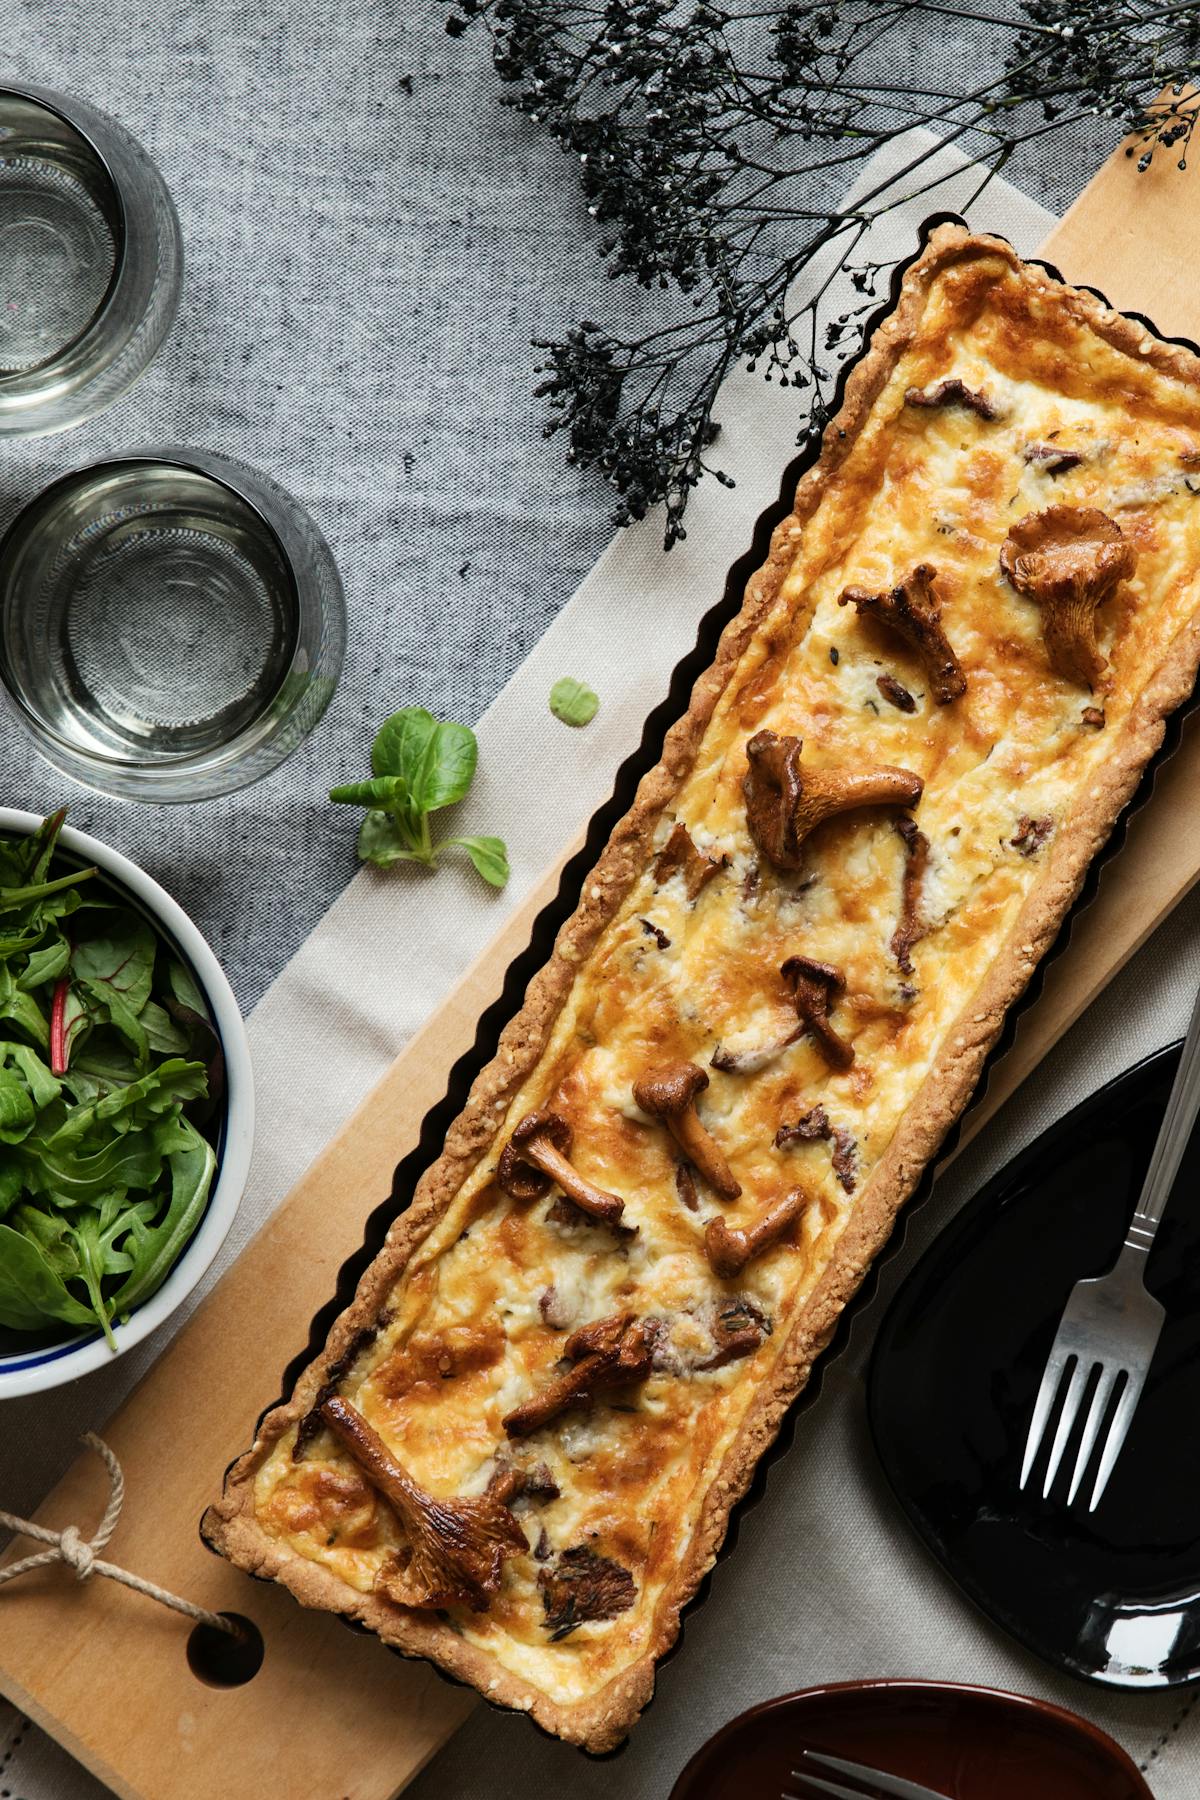 Keto cheese pie with chanterelle mushrooms